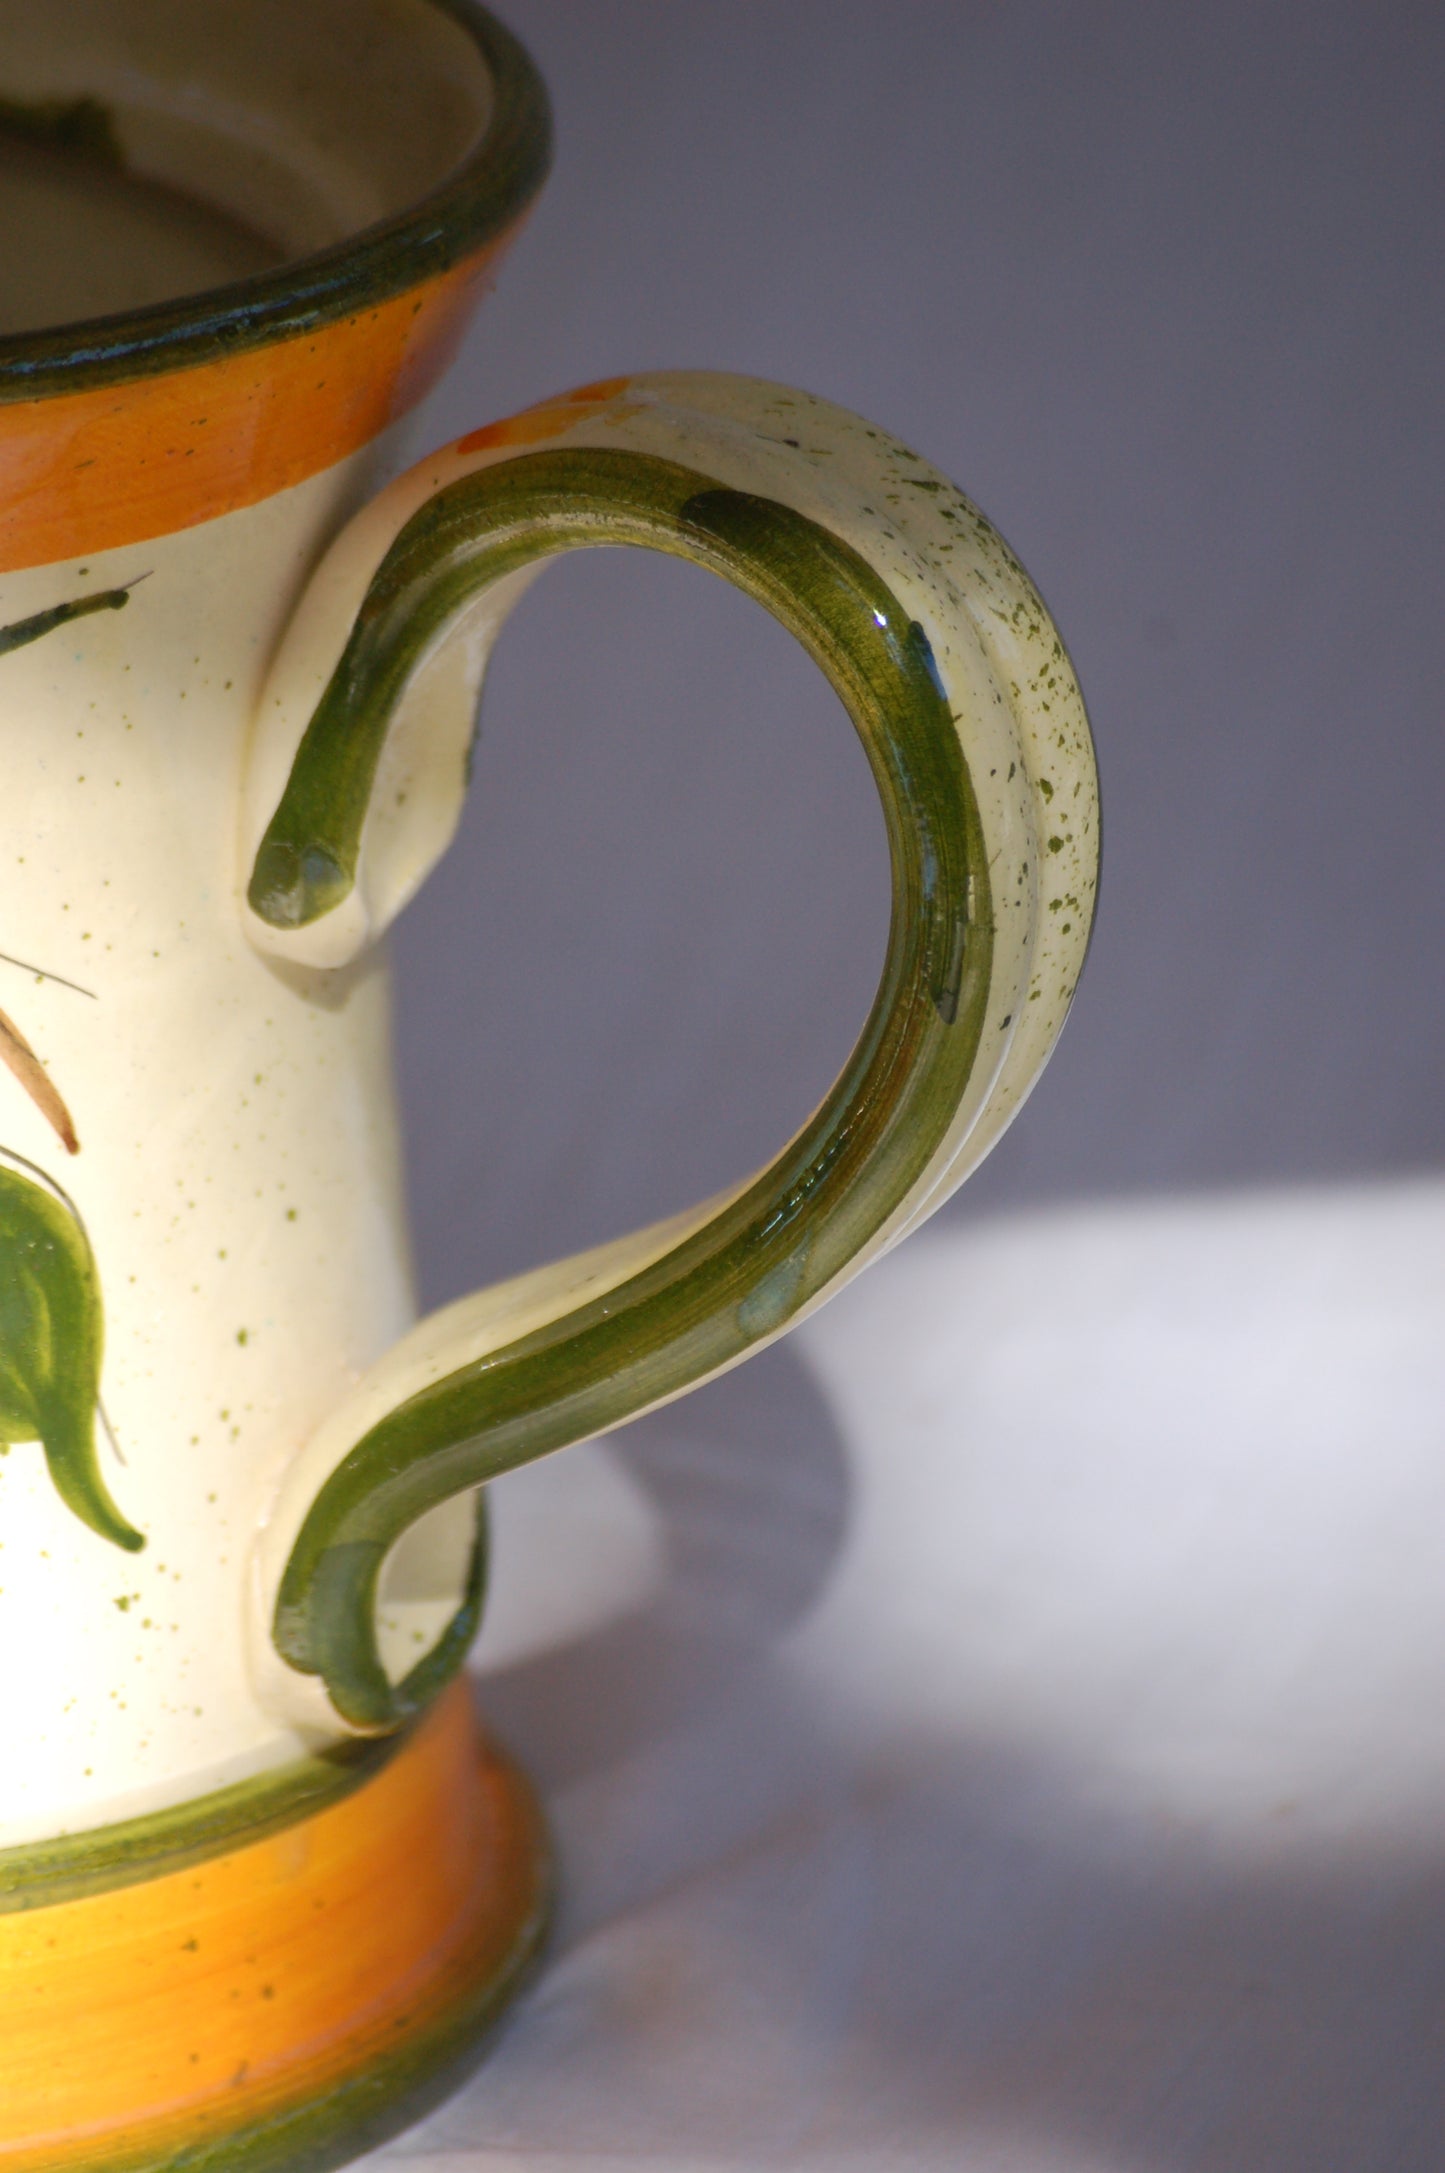 ©MediterraStyle A beautiful 1960s Provencal ceramic carafe with hand-painted decoration representing an apricot branch with its fruits. This caraf will put instant sunshine on your table. Vintage item is as new! Signed on the bottom. Loved and sold by Mediterra Style